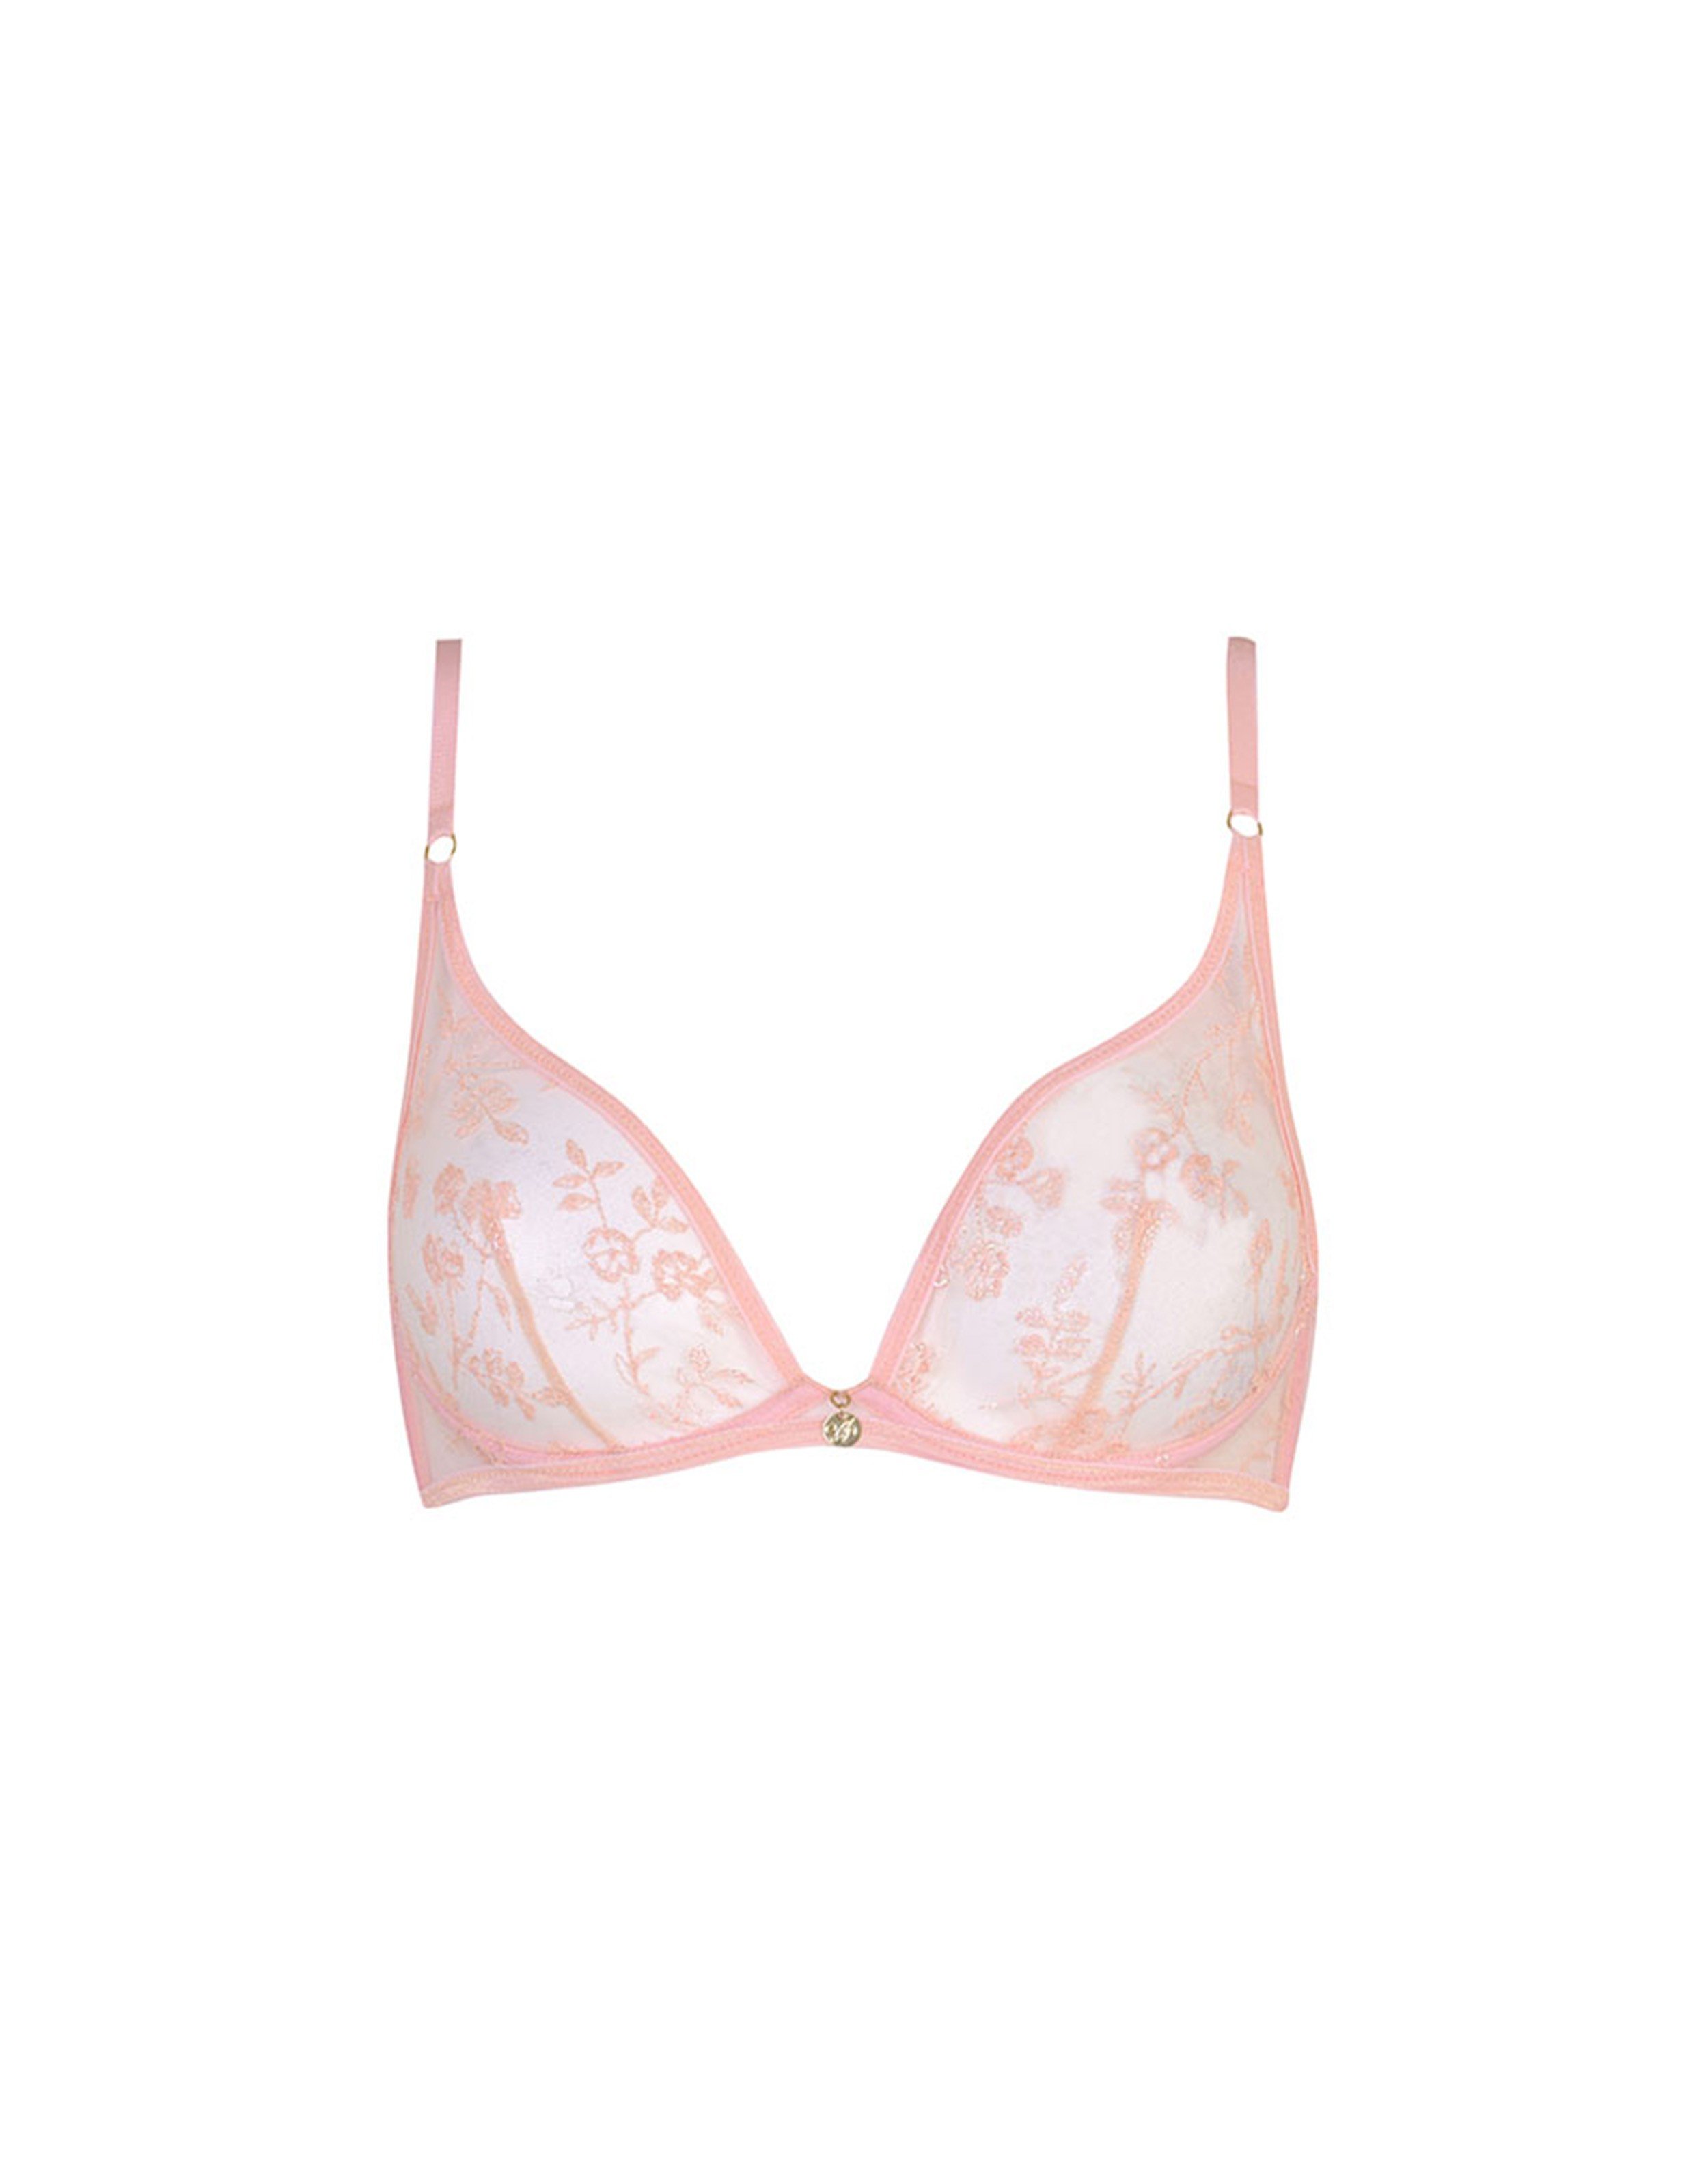 Zadi Full Cup Underwired Bra in Peach | Agent Provocateur Outlet